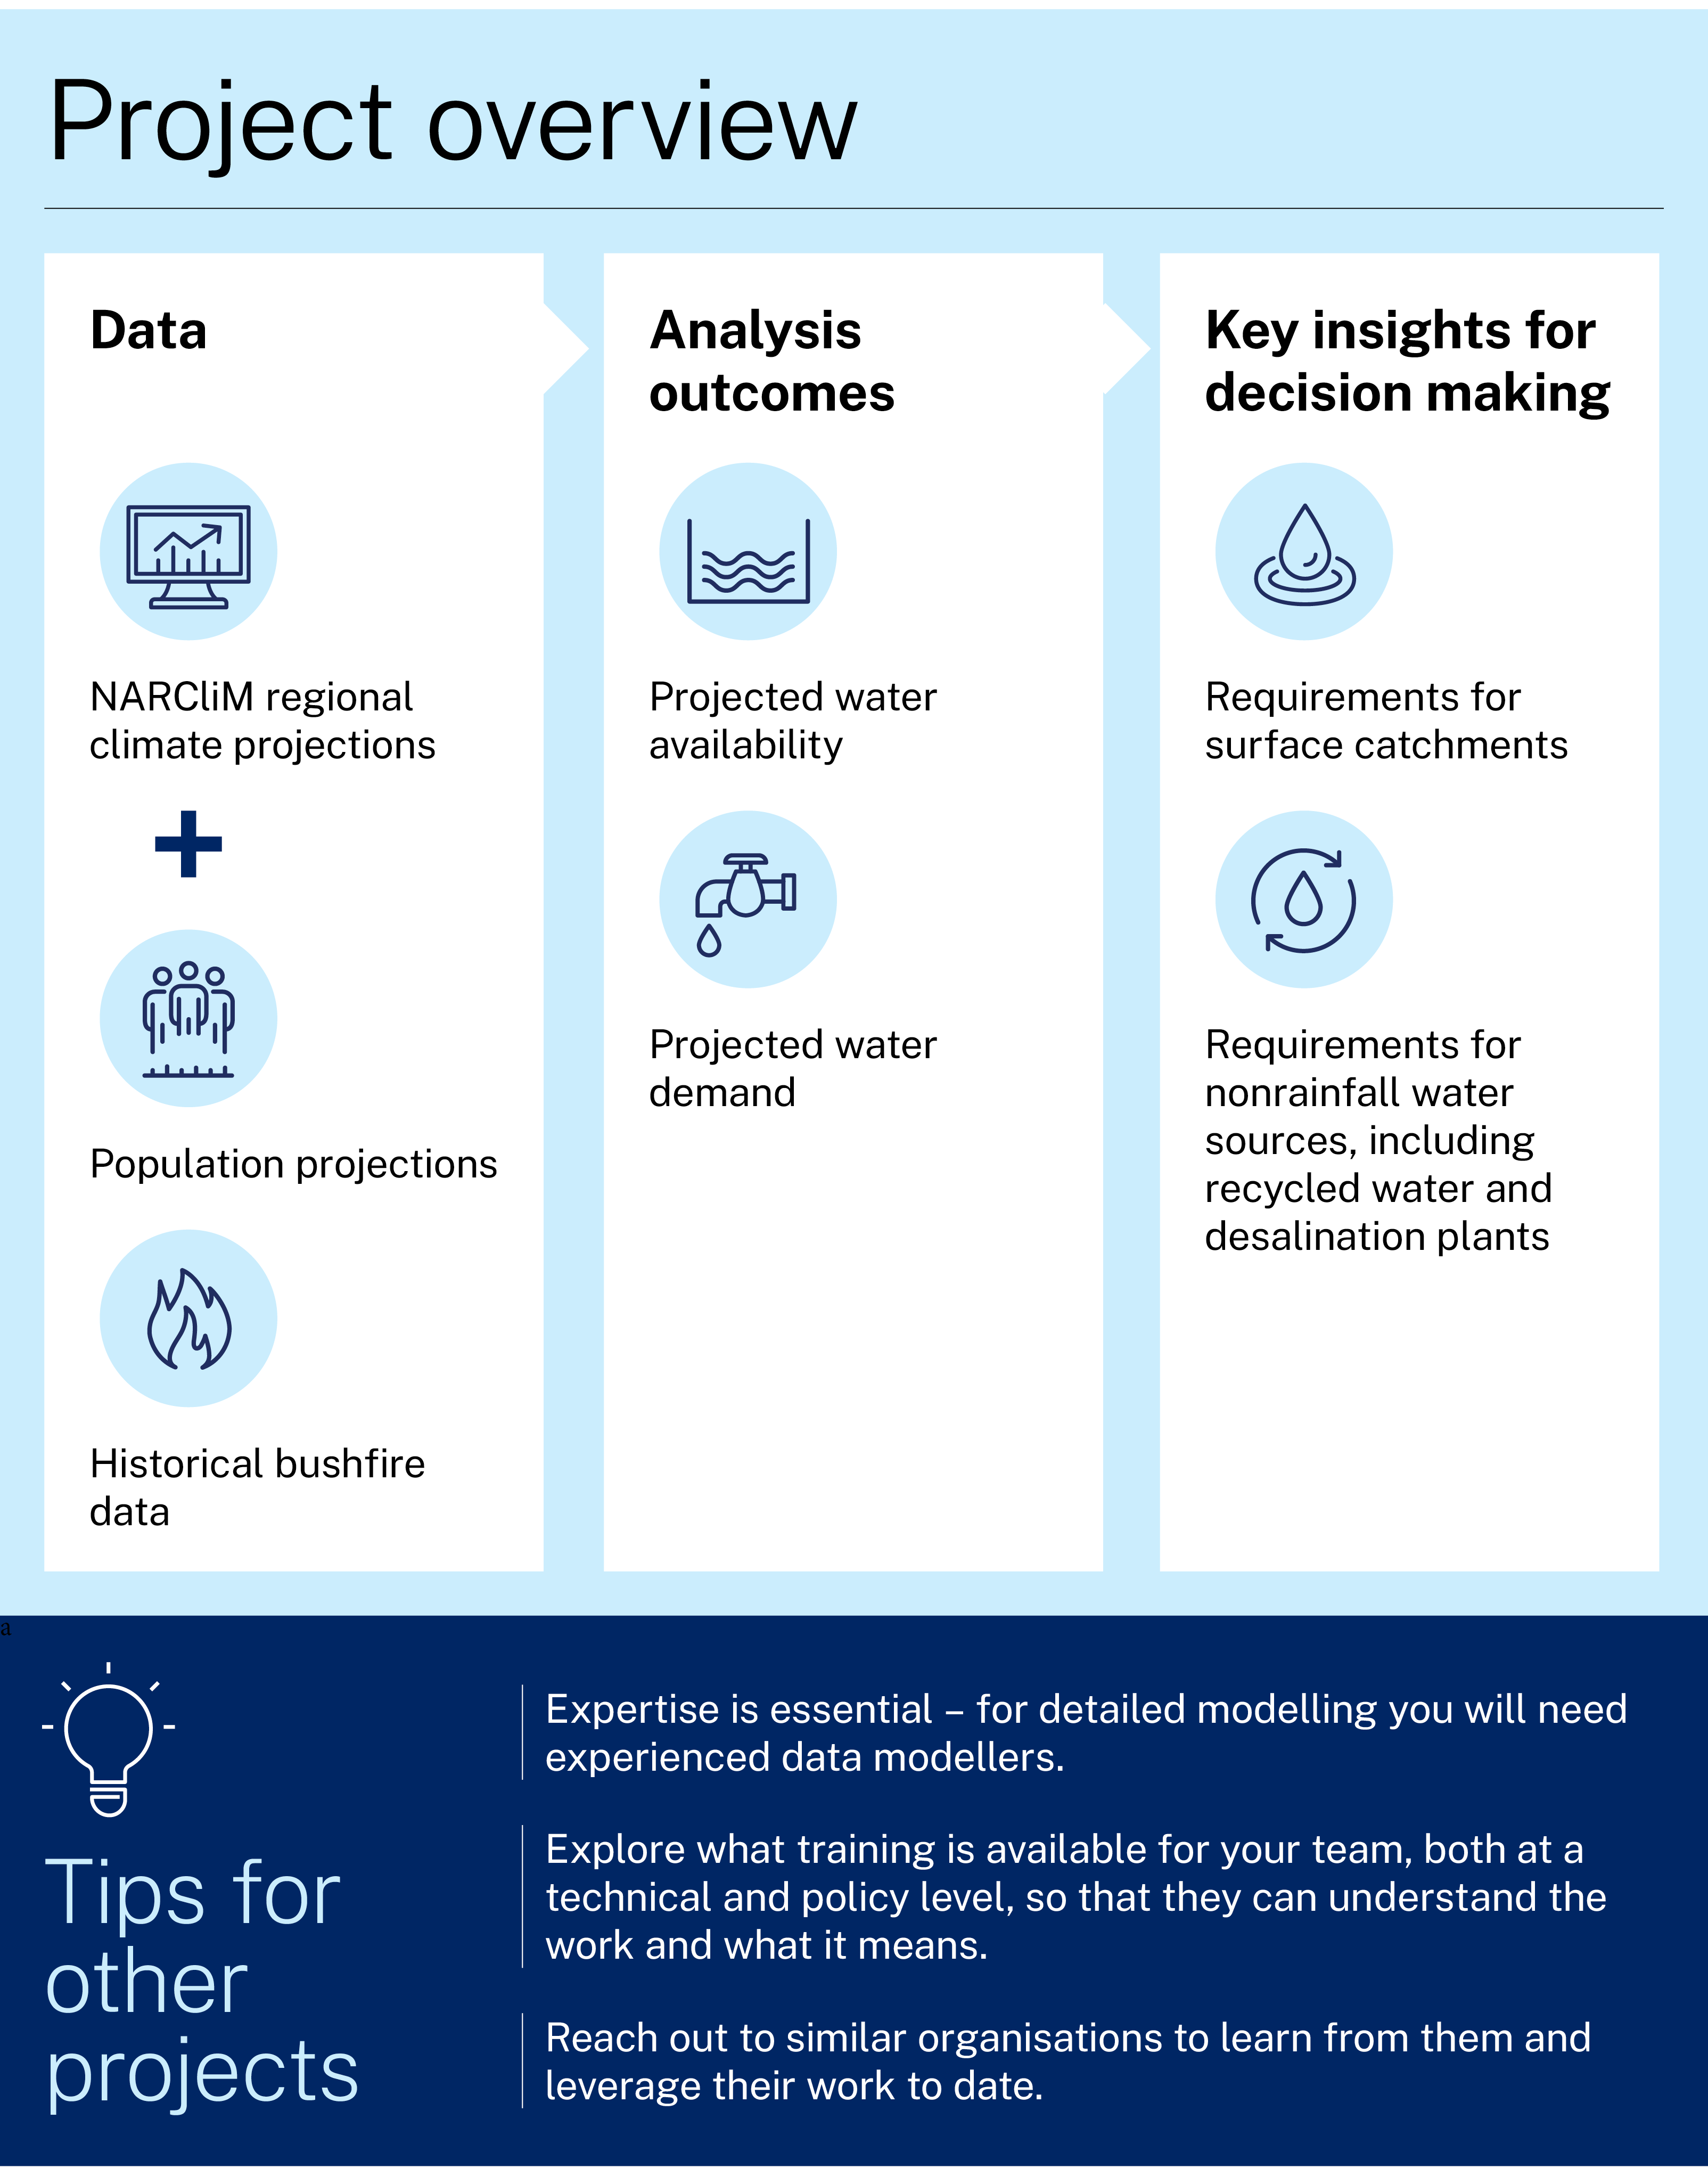 Information graphic. Overview of the project featured in the case study. One. Data. Narclim regional climate projections plus population projections and historical bushfire data. Two. Analysis outcomes. Projected water availability and projected water demand. Three. Key insights for decision making. Requirements for surface catchments and requirements for non rainfall water sources, including recycled water and desalination plants. Tips for other projects. Expertise is essential - for detailed modelling you will need experienced data modellers. Explore what training is available for your team, both at the technical and policy level, so that they can understand the work and what it means. Reach out to similar organisations to learn from them and leverage their work to date. 